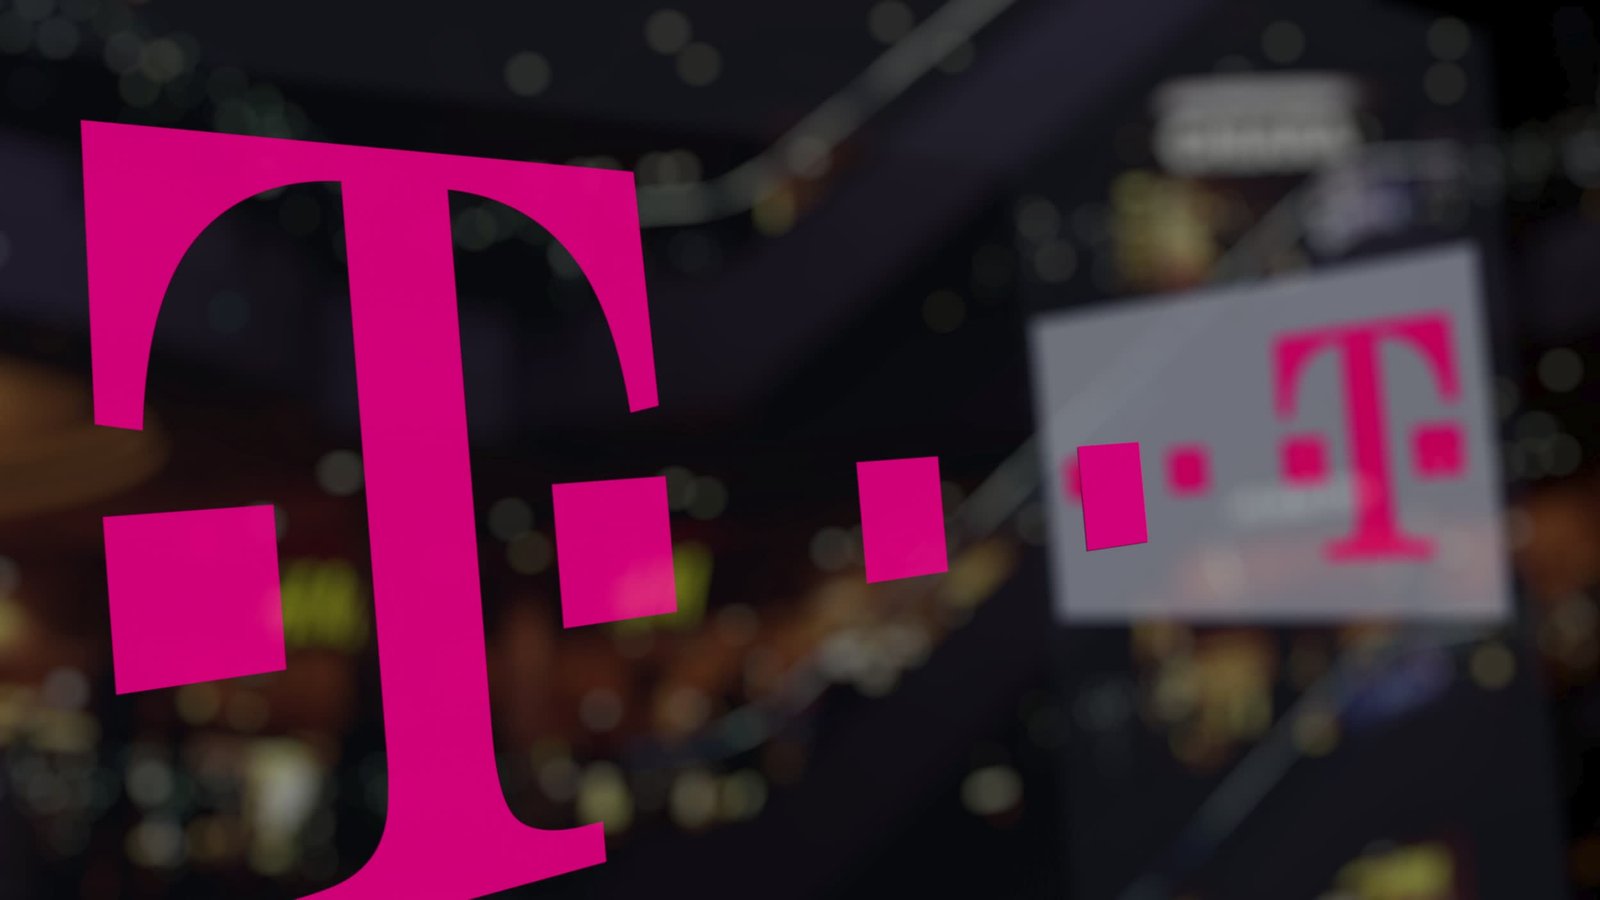 Hacker has claimed responsibility for the T-Mobile attack.